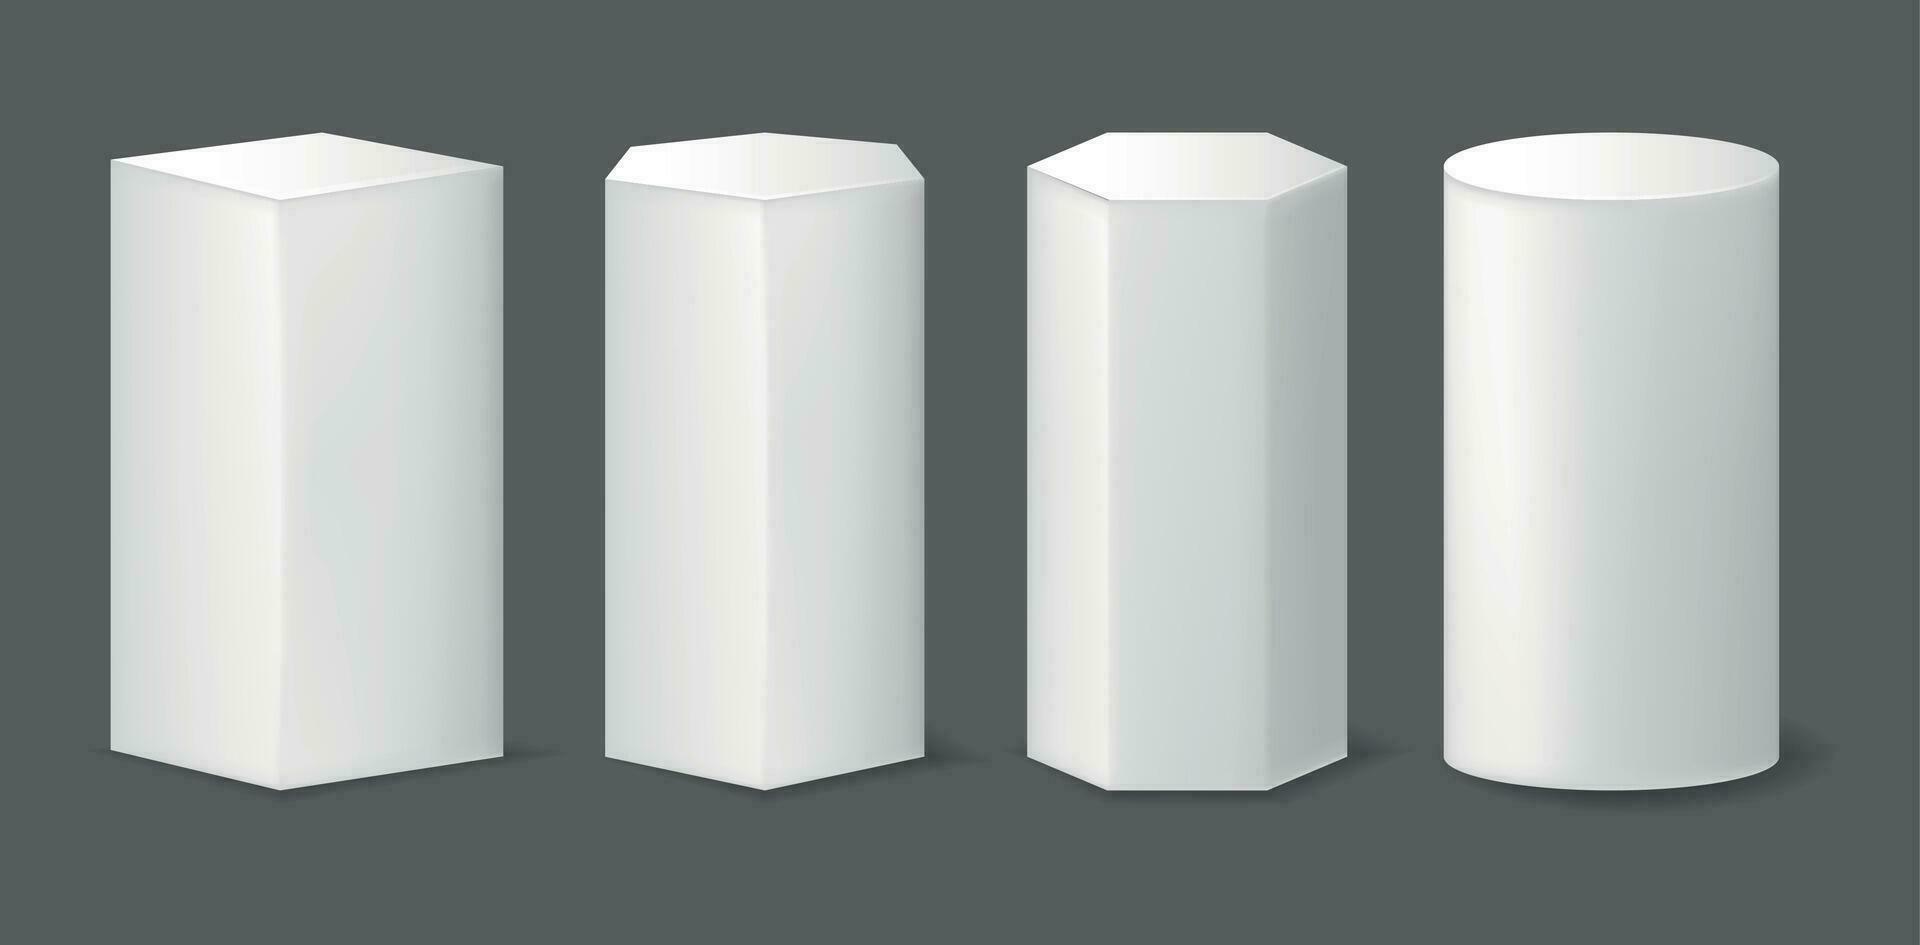 Realistic Detailed 3d Abstract Geometric Pedestals Podiums Set. Vector